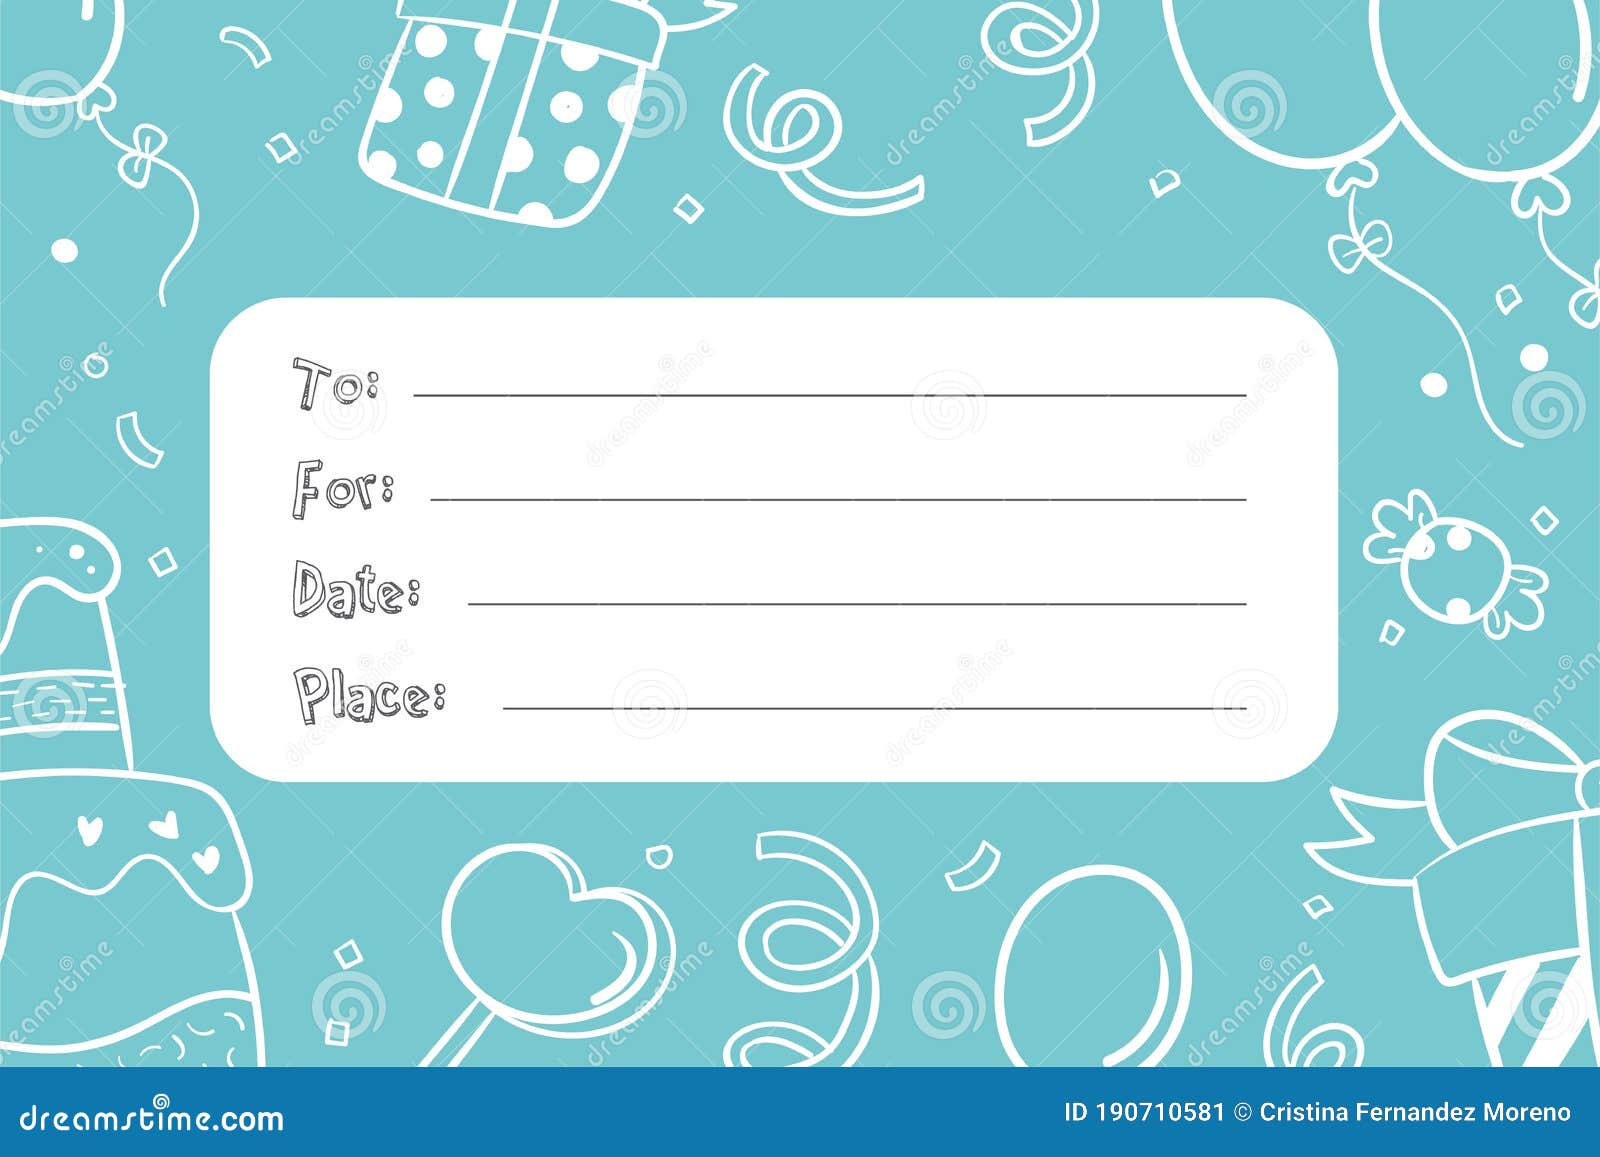 Birthday Invitation Card To Write Name, Date and Place Stock